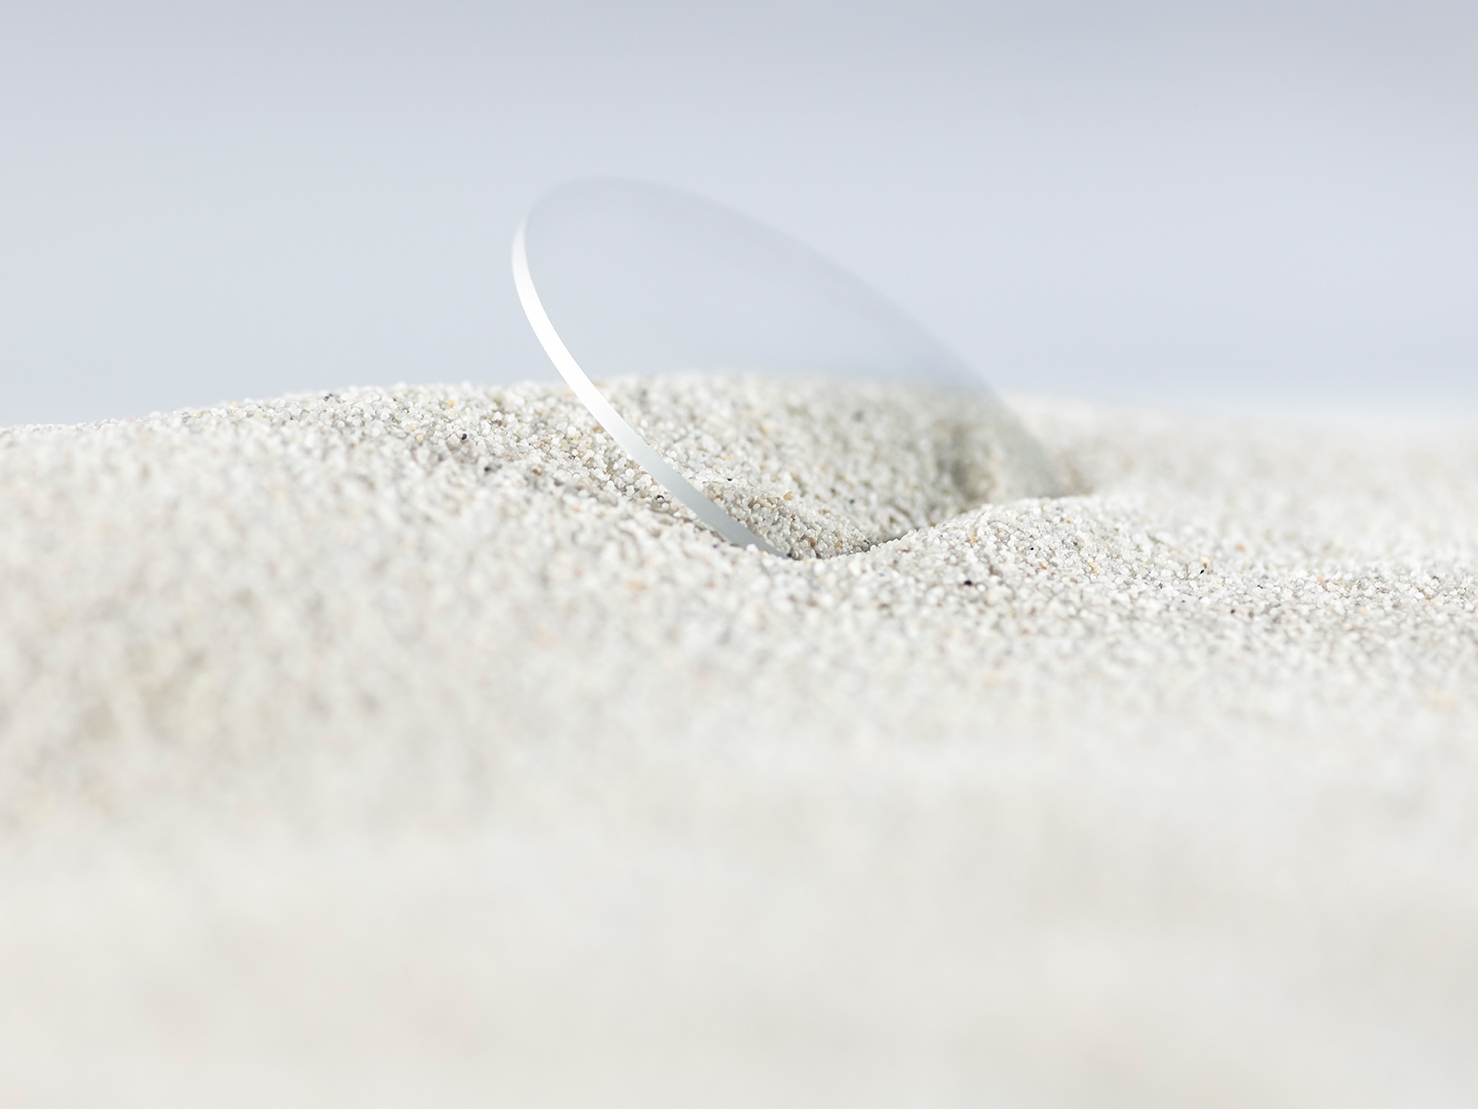 A ZEISS lens with a durable coating is covered in rough sand but still scratch-free.